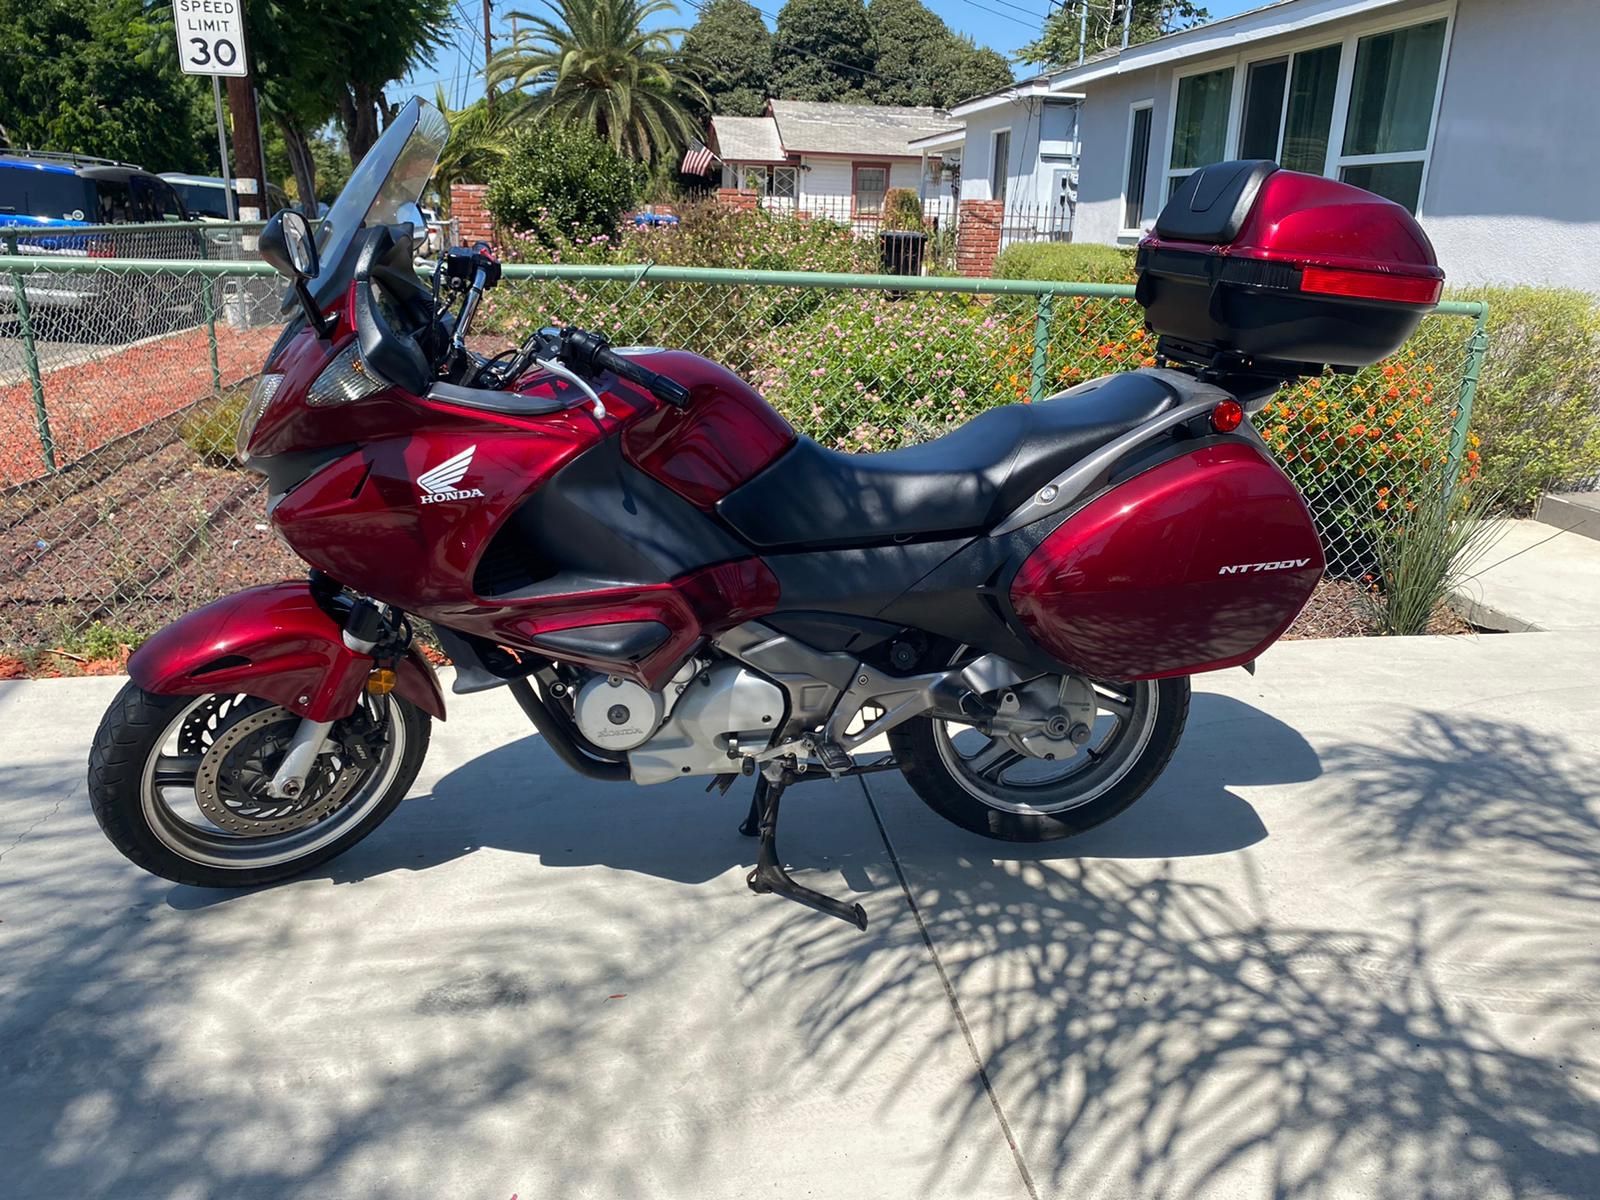 2010 HONDA NT700V ONLY 1 SENIOR OWNER SINCE NEW. PERFECT TOURING BIKE W/ ONLY 9K ORIGINAL MILES. RELIABLE & GAS SAVER 60 MPG! LOTS OF STORAGE SPACE!!